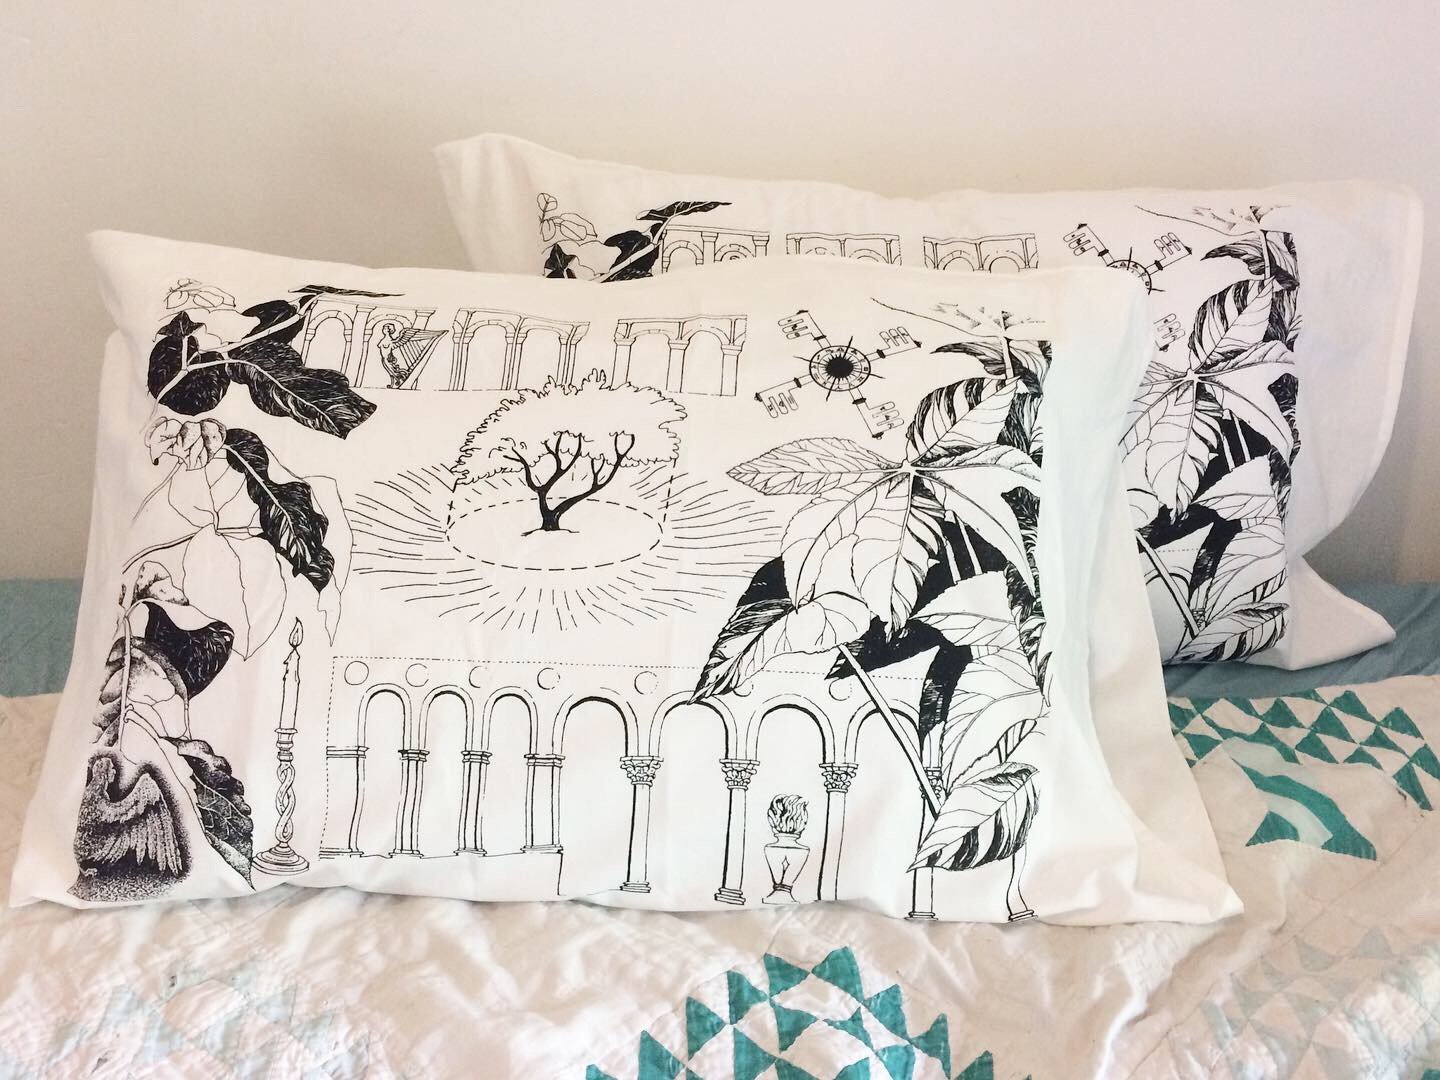  Middle of the Forest pillowcases  2018 